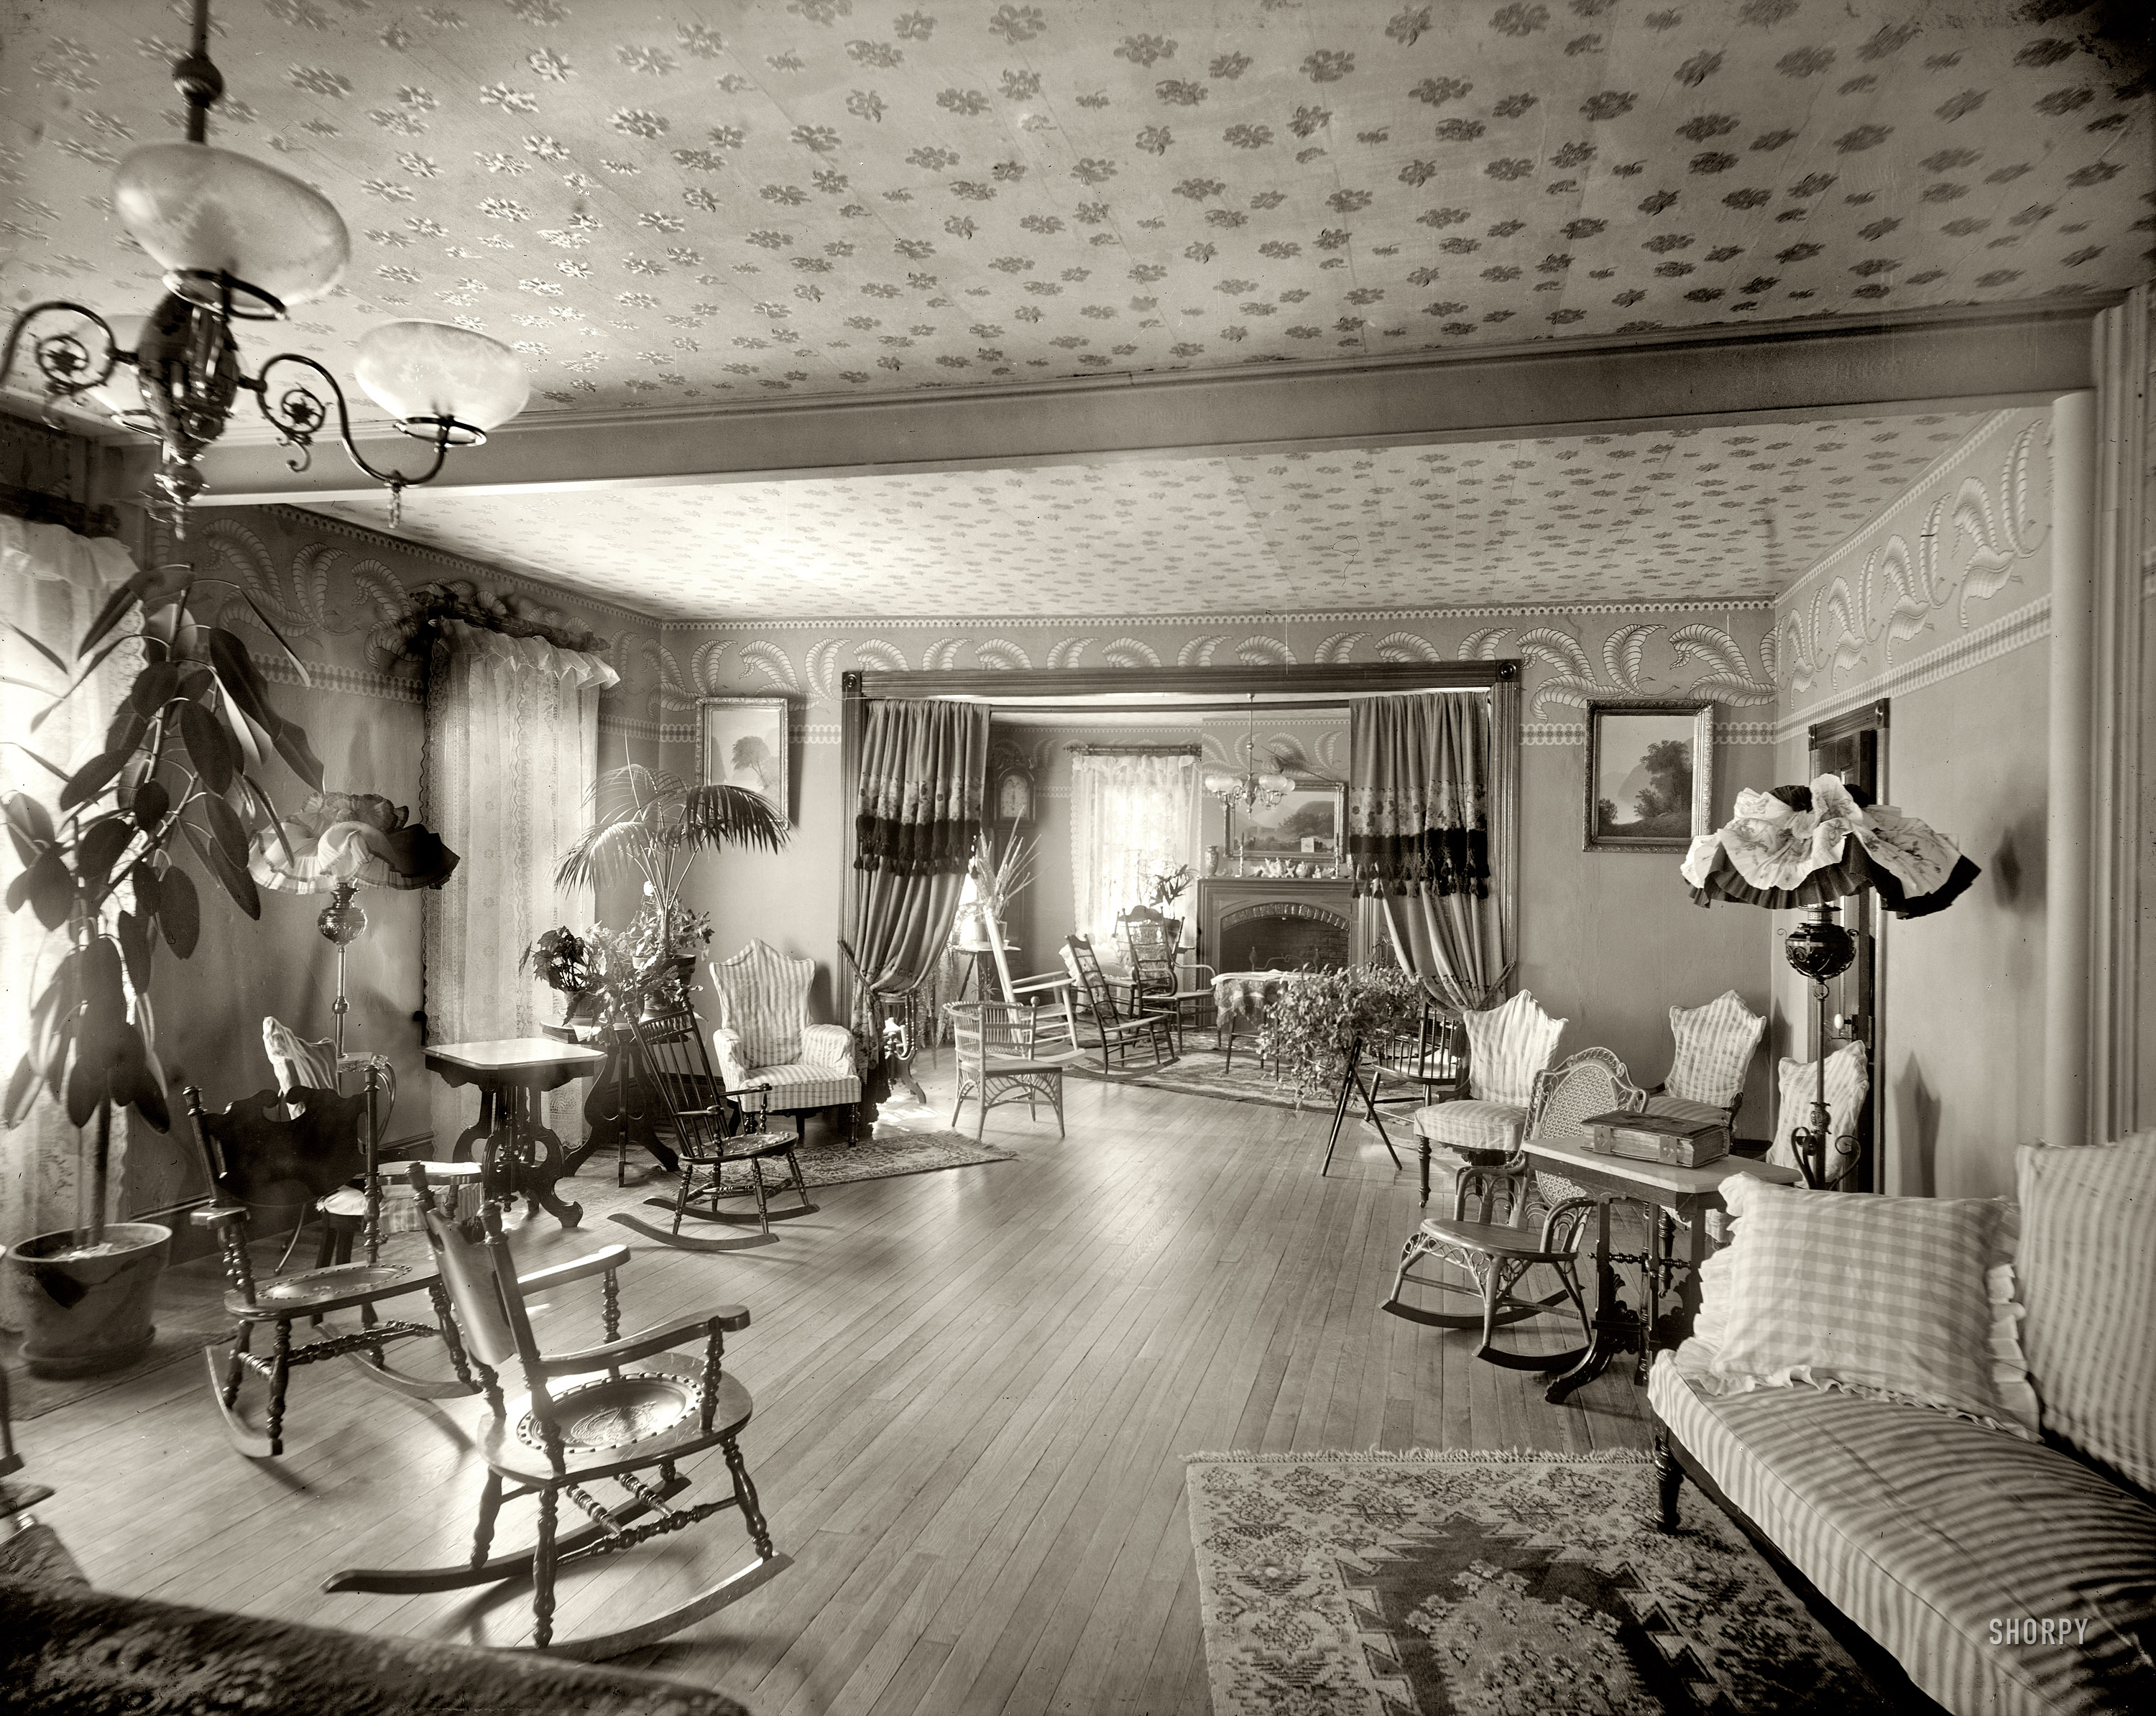 Parkside, Pennsylvania, circa 1906. "Park Hotel parlors." Cellphones off, please. 8x10 inch dry plate glass negative, Detroit Publishing Company. View full size.